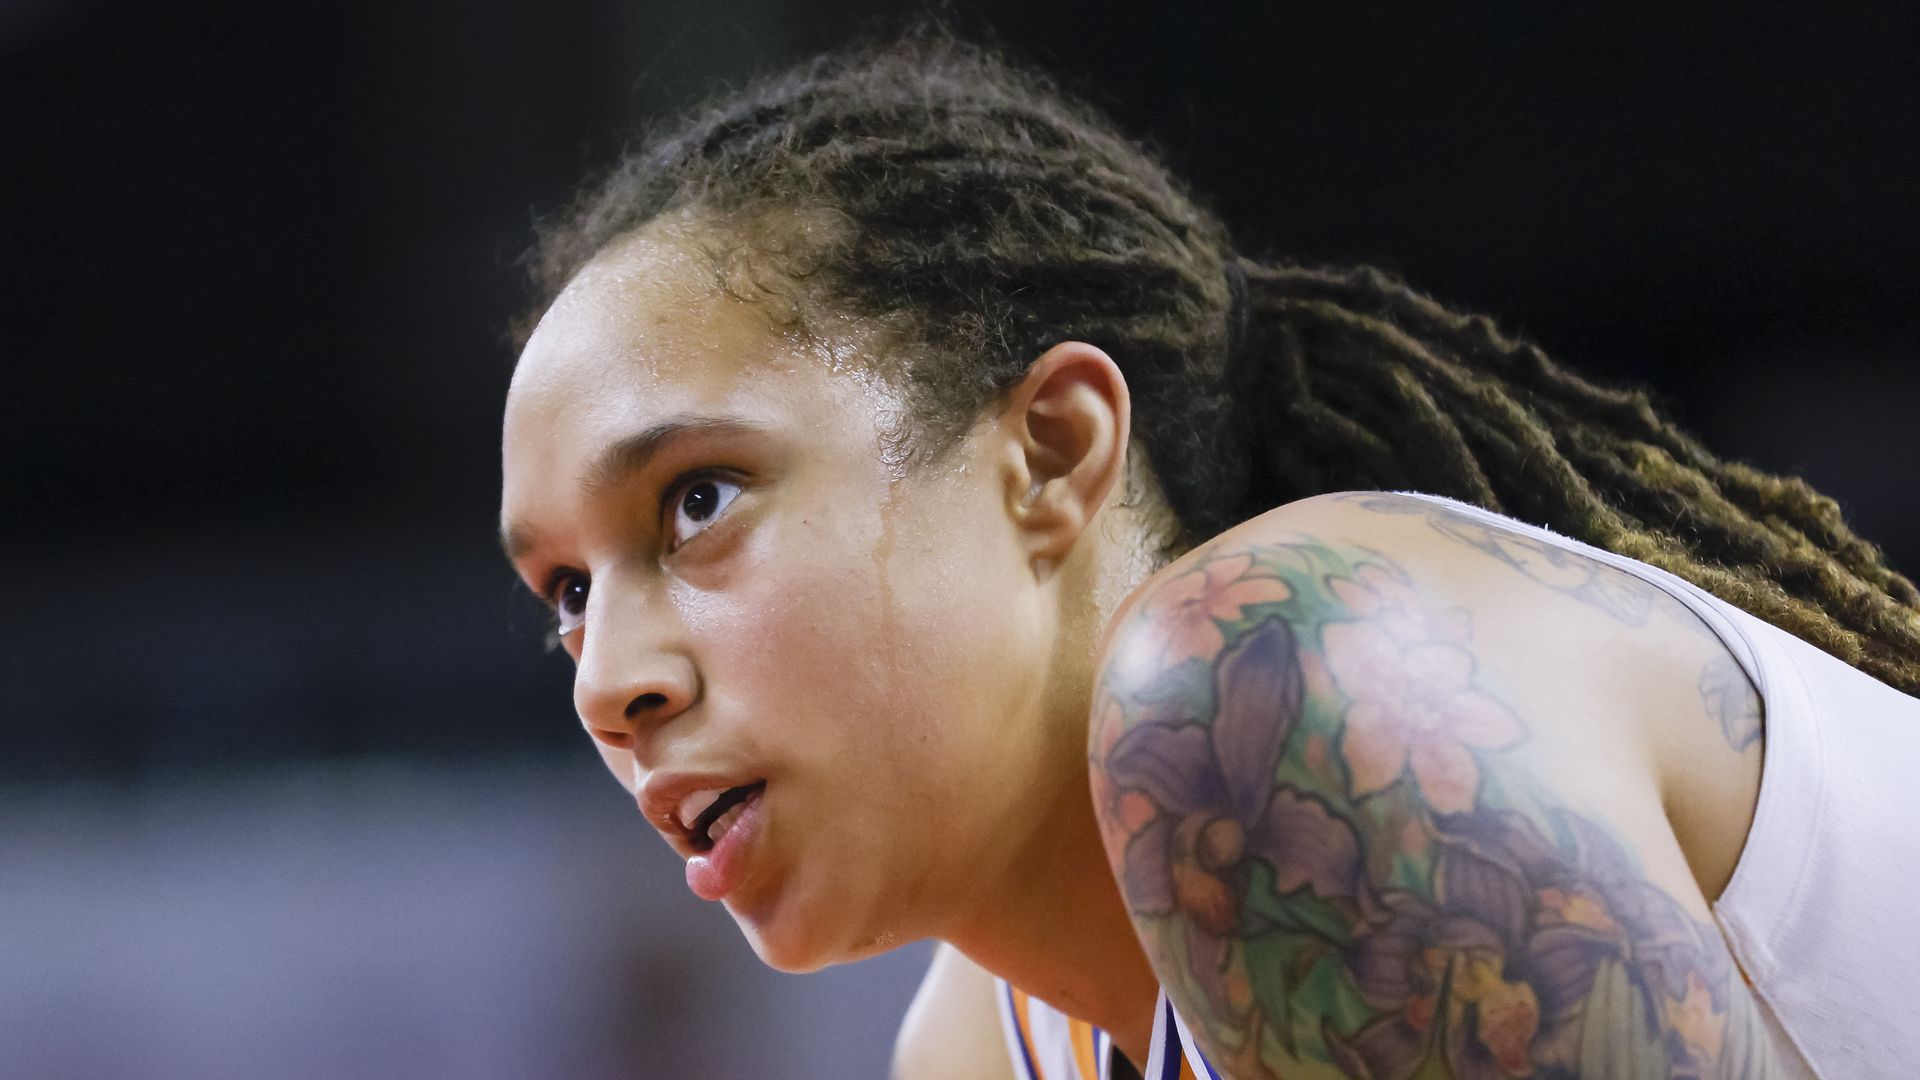 Brittney Griner #42 of the Phoenix Mercury is seen during the game against the Indiana Fever at Indiana Farmers Coliseum on September 4, 2021 in Indianapolis, Indiana.